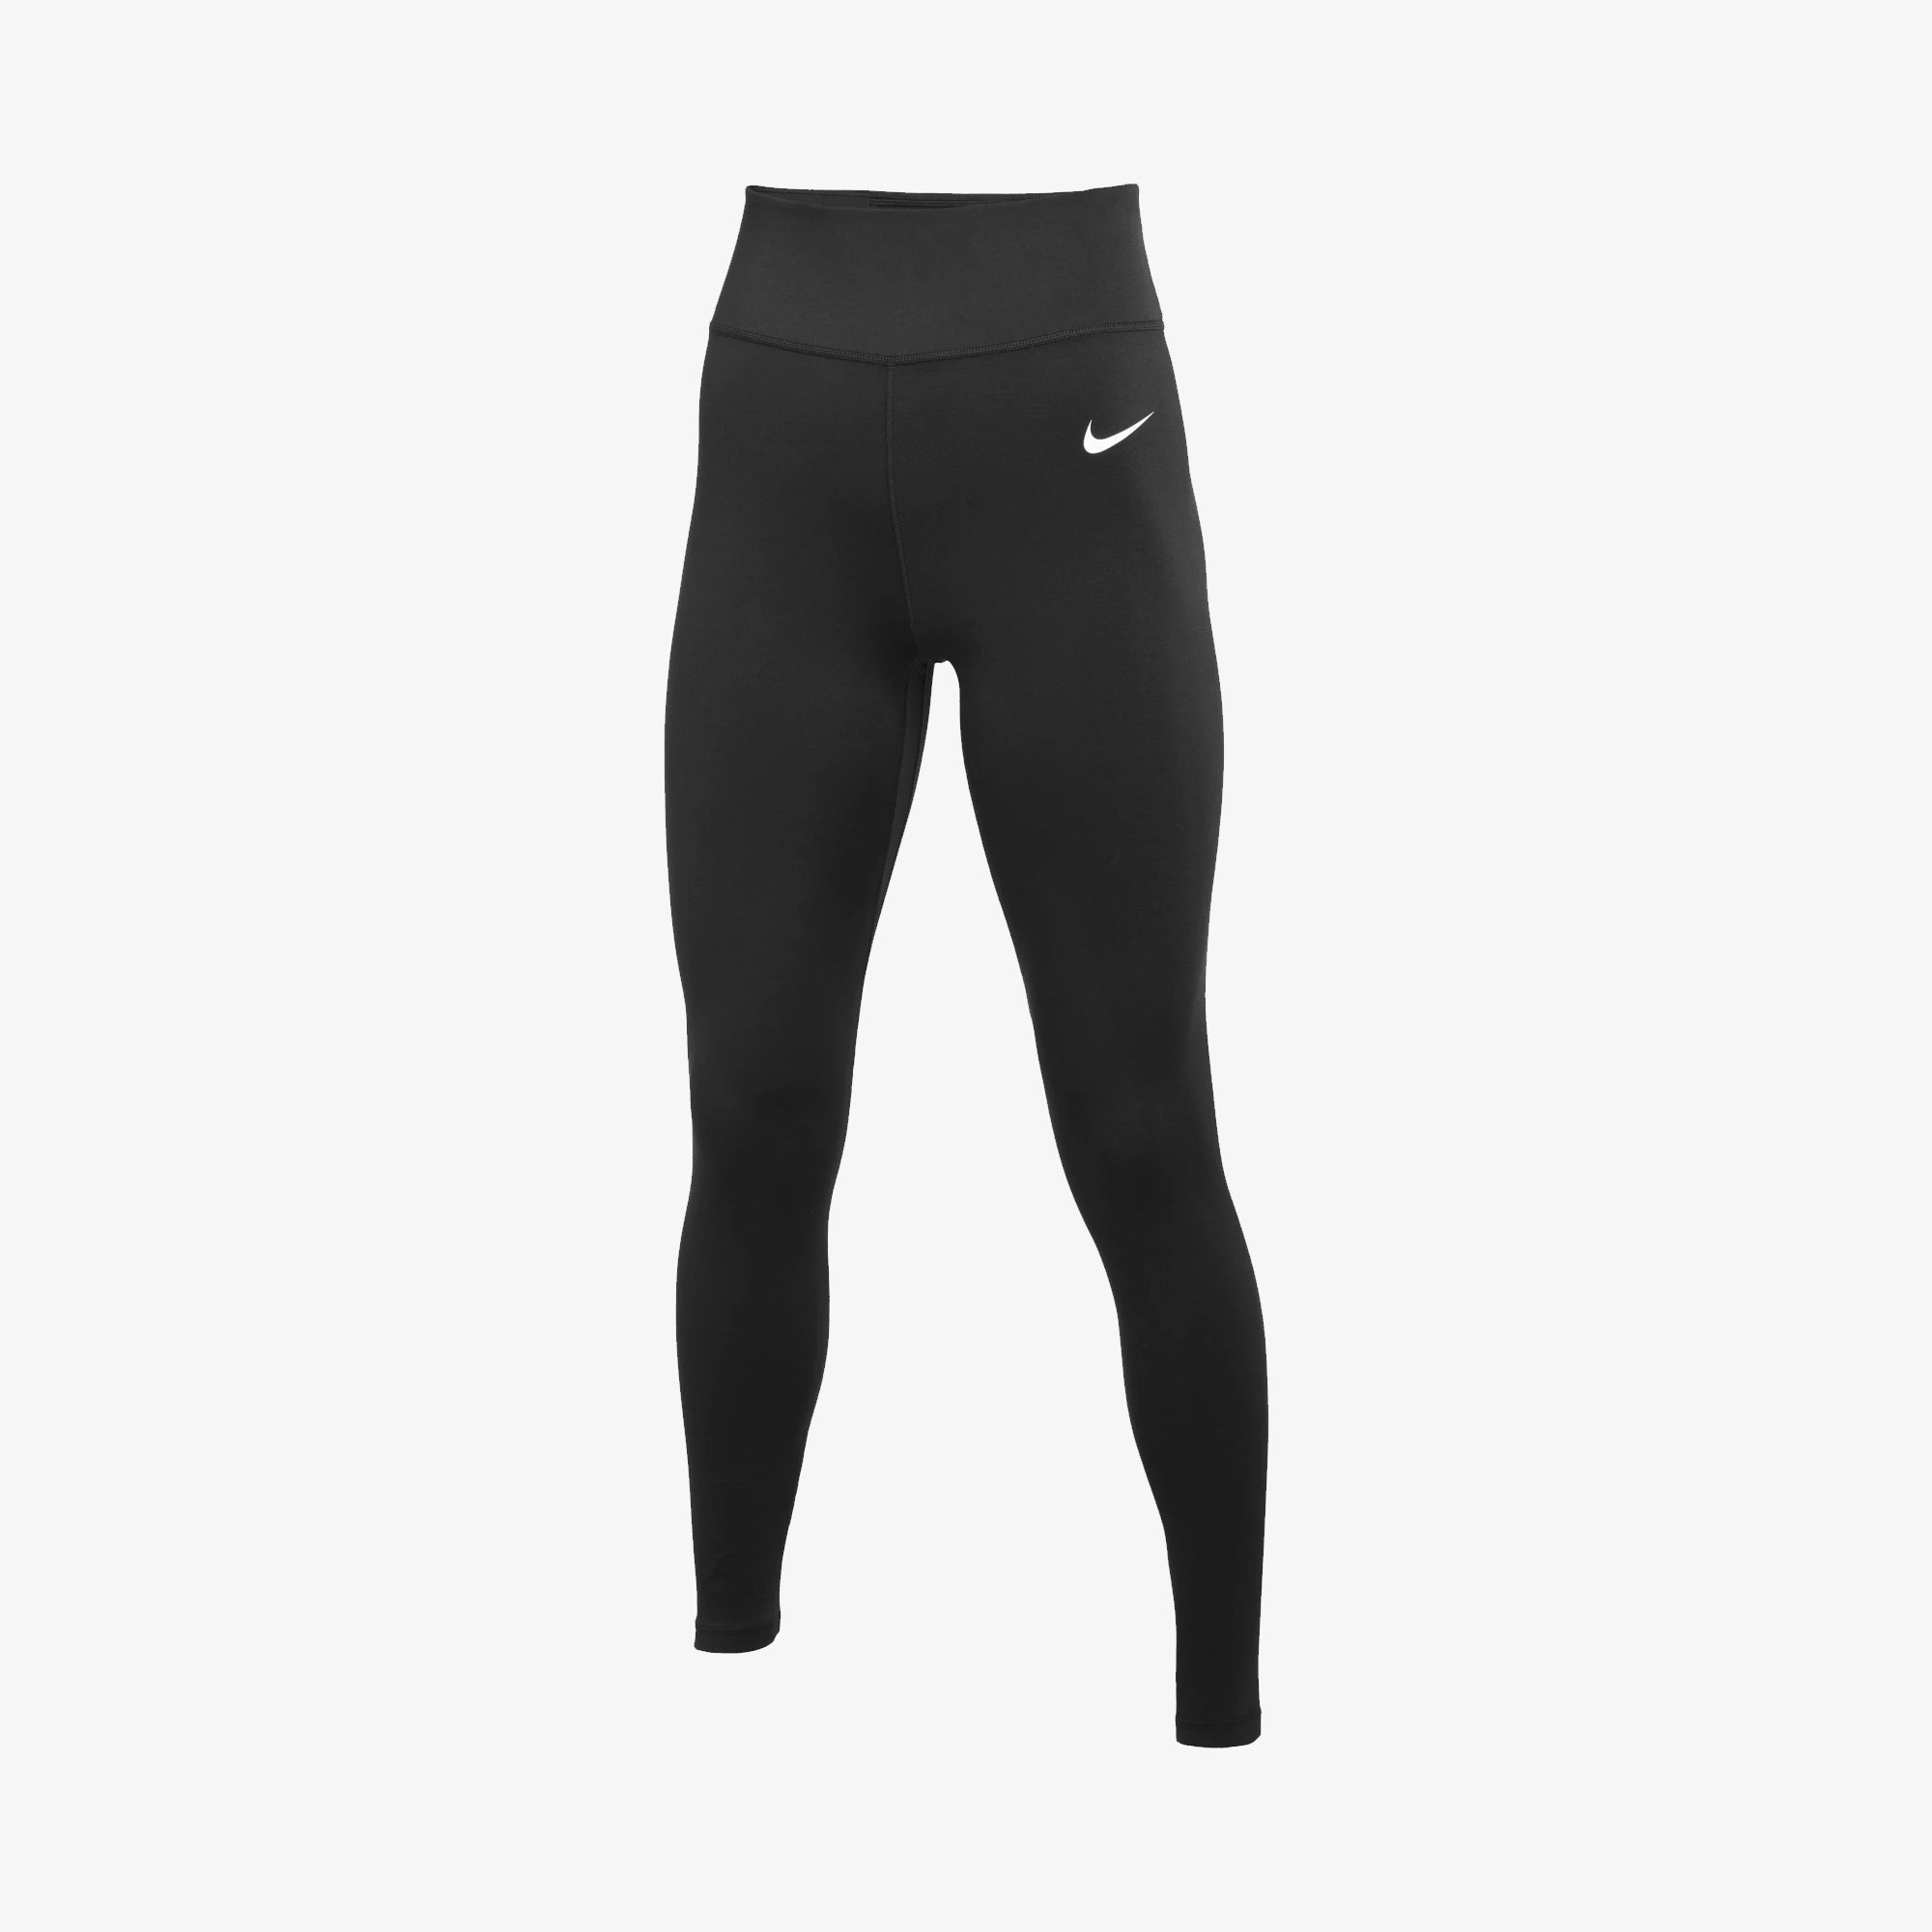 Nike One Women's Mid-Rise Tights